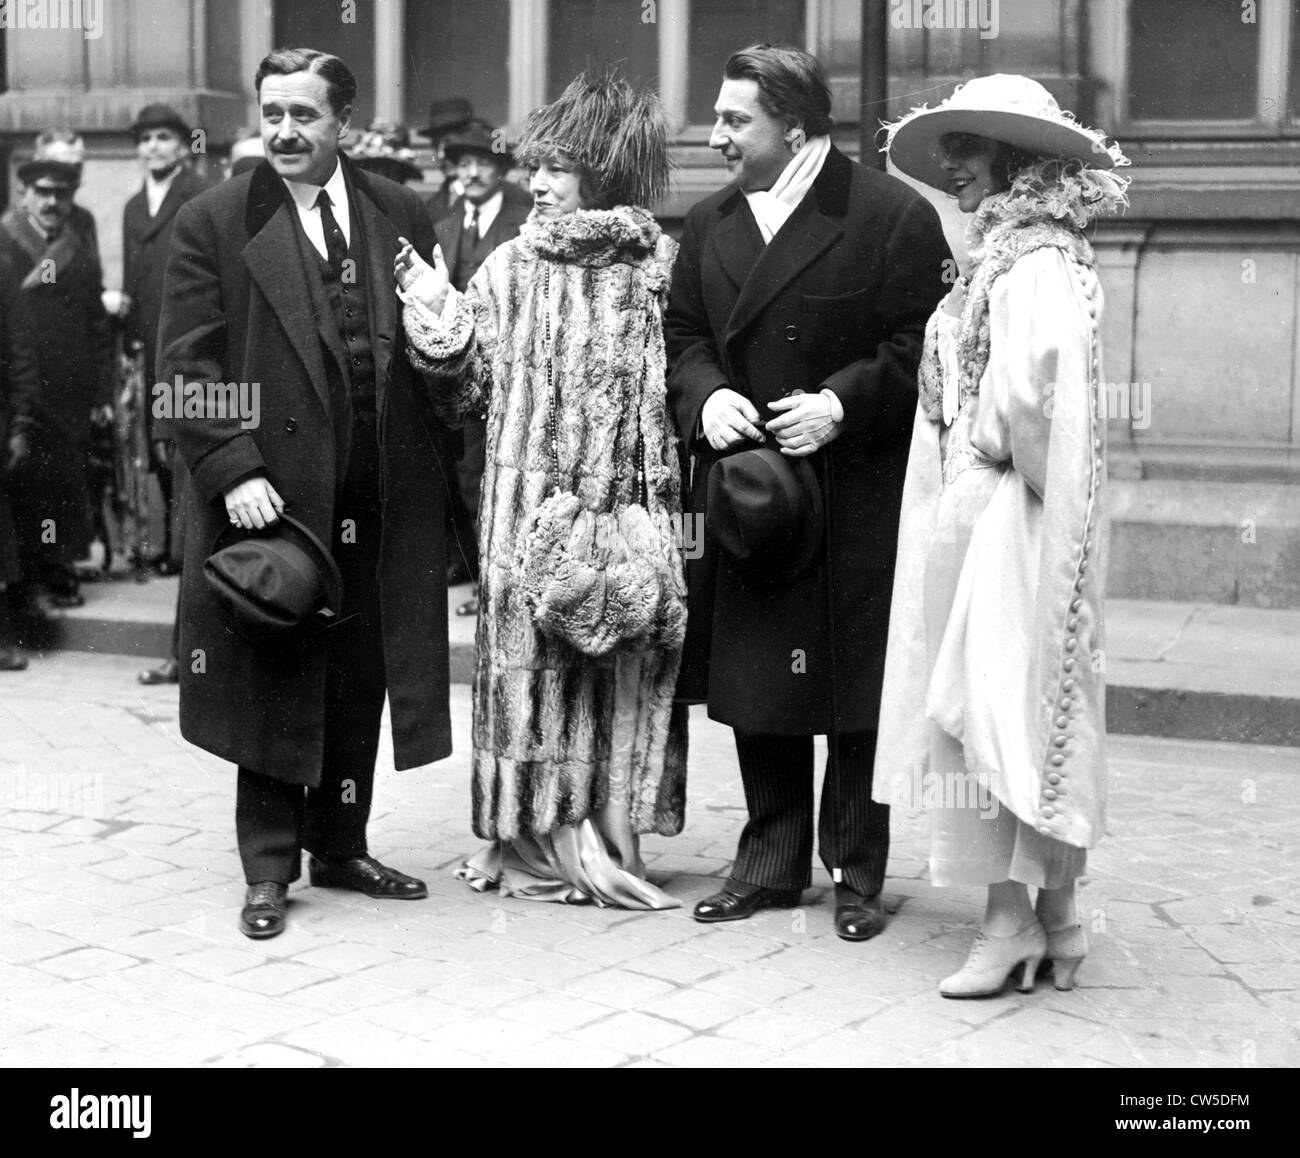 Wedding Sacha Guitry and Yvonne Printemps. In front City Hall Georges Feydeau Sacha Guitry Yvonne Printemps and Sarah Bernhardt Stock Photo